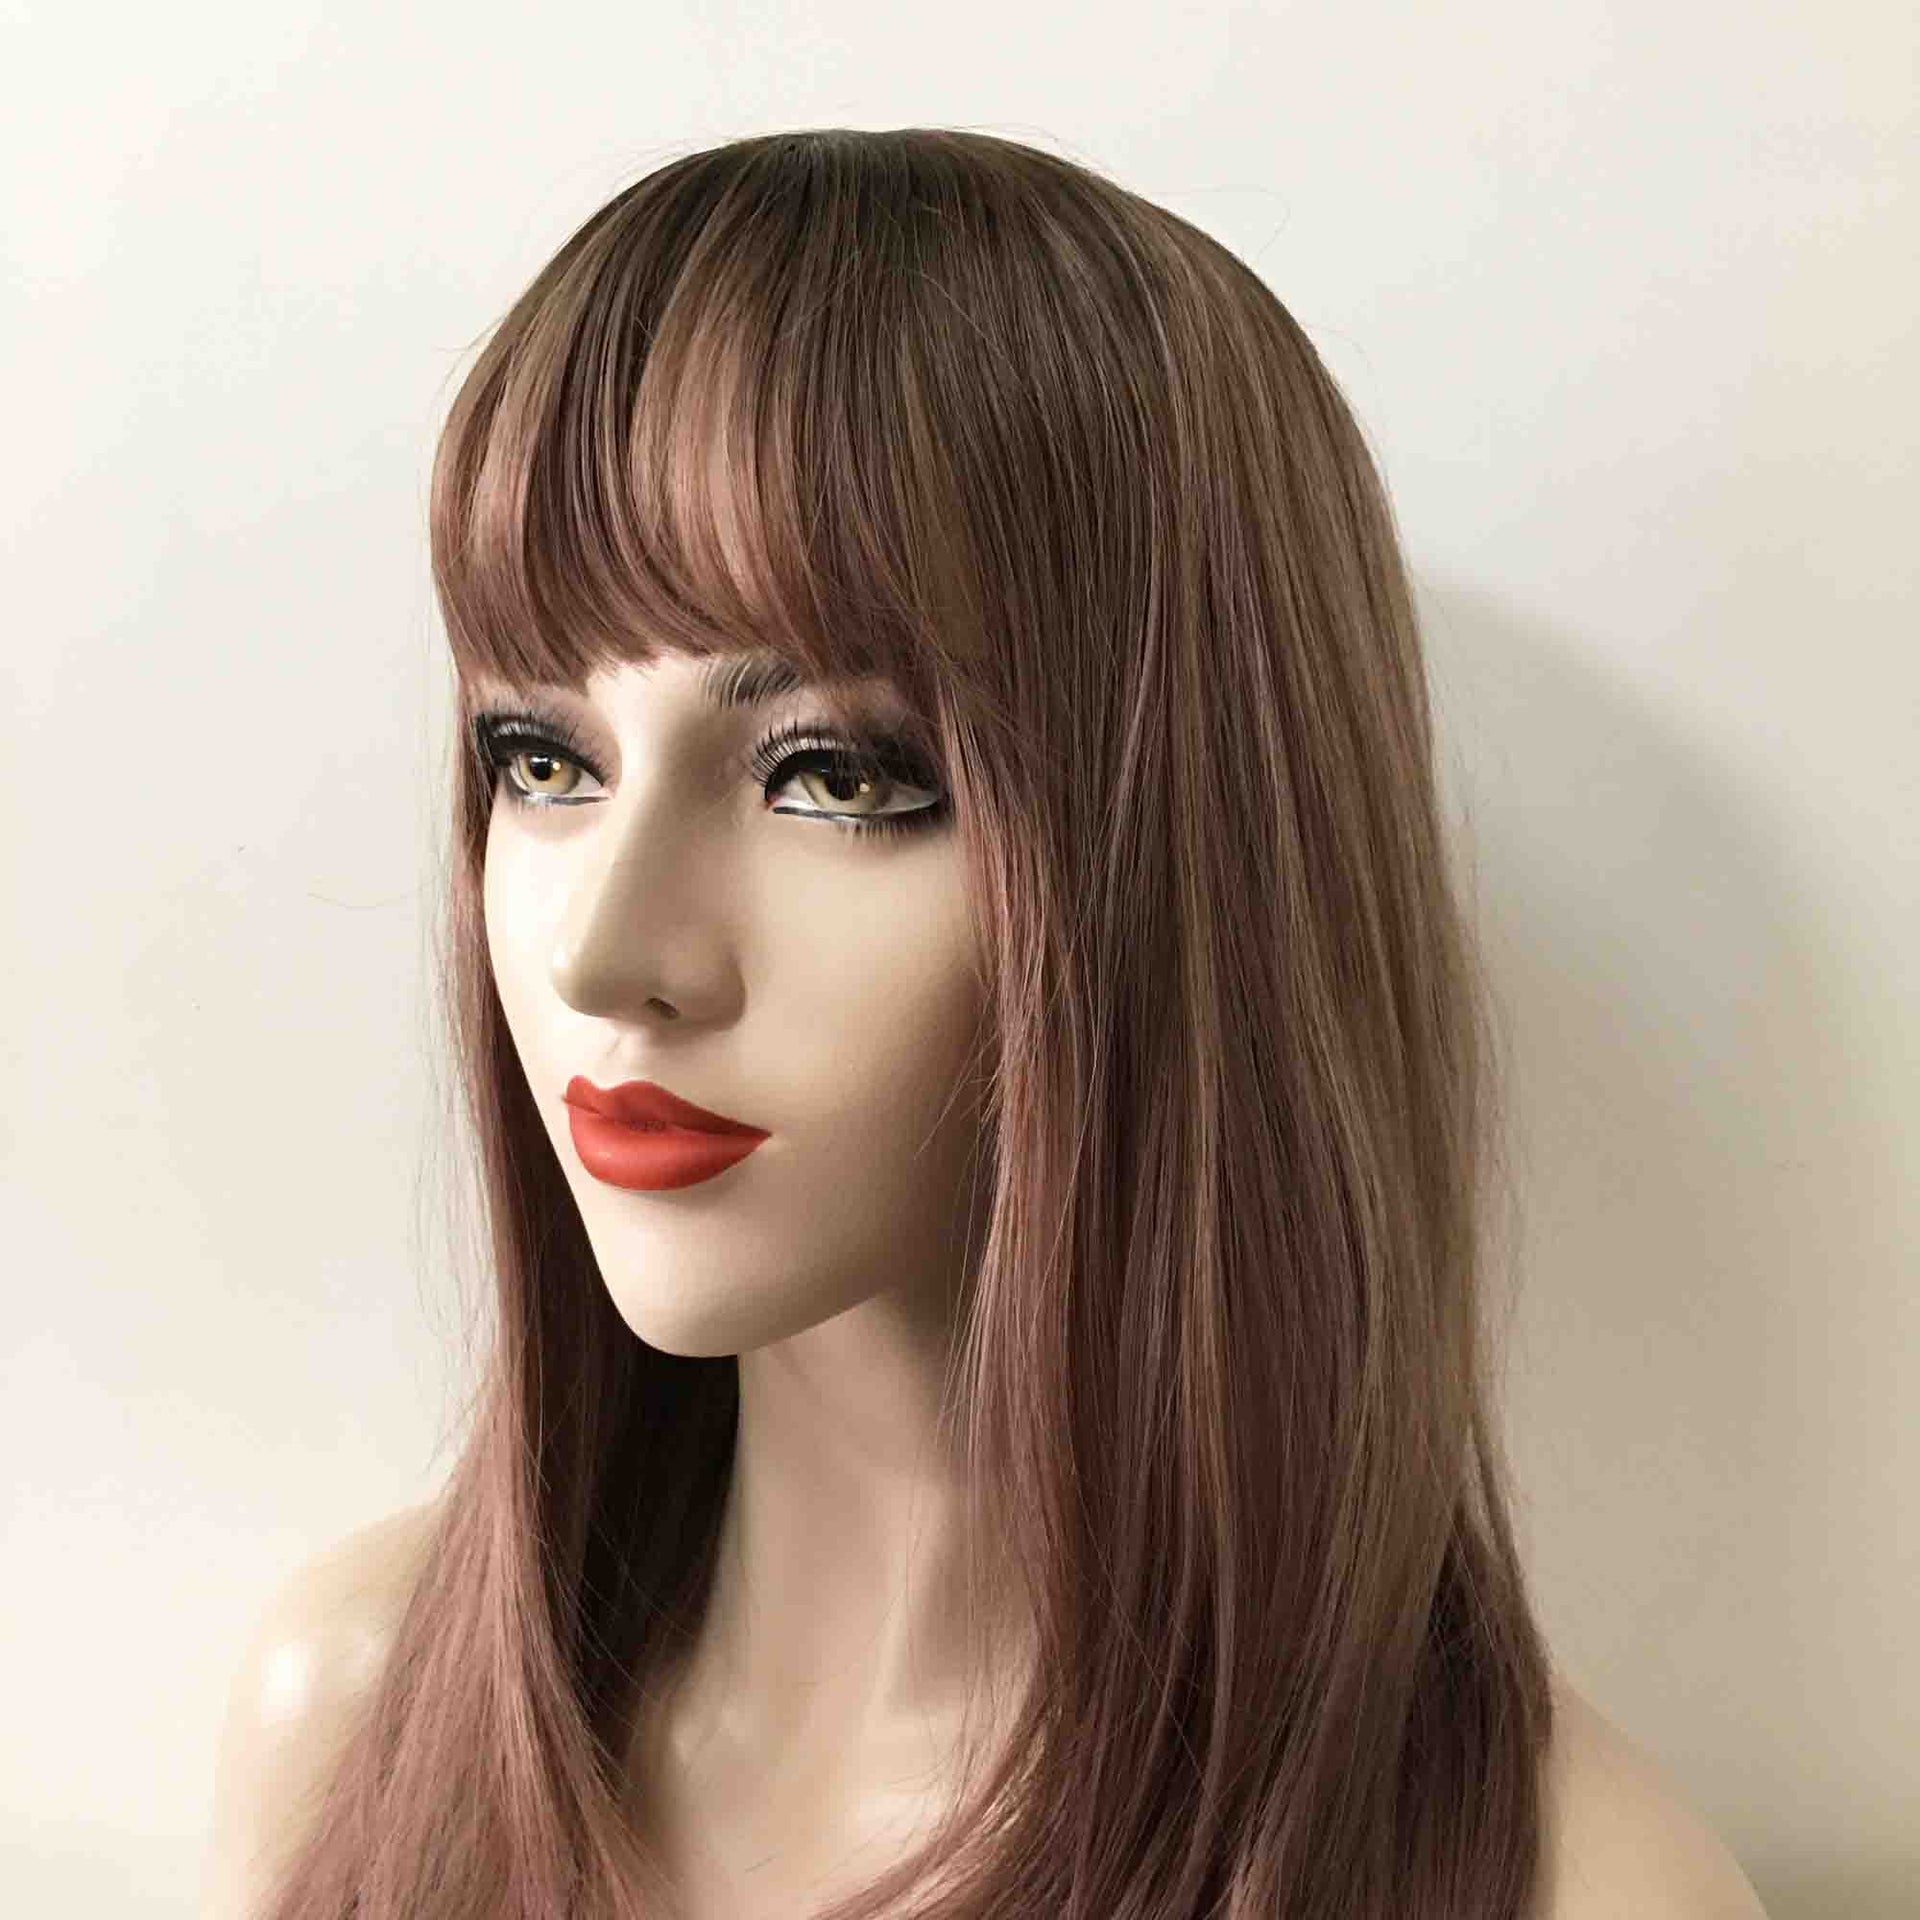 nevermindyrhead Women Dusty Pink Ombre Long Straight Fringe Bangs Layered Wig